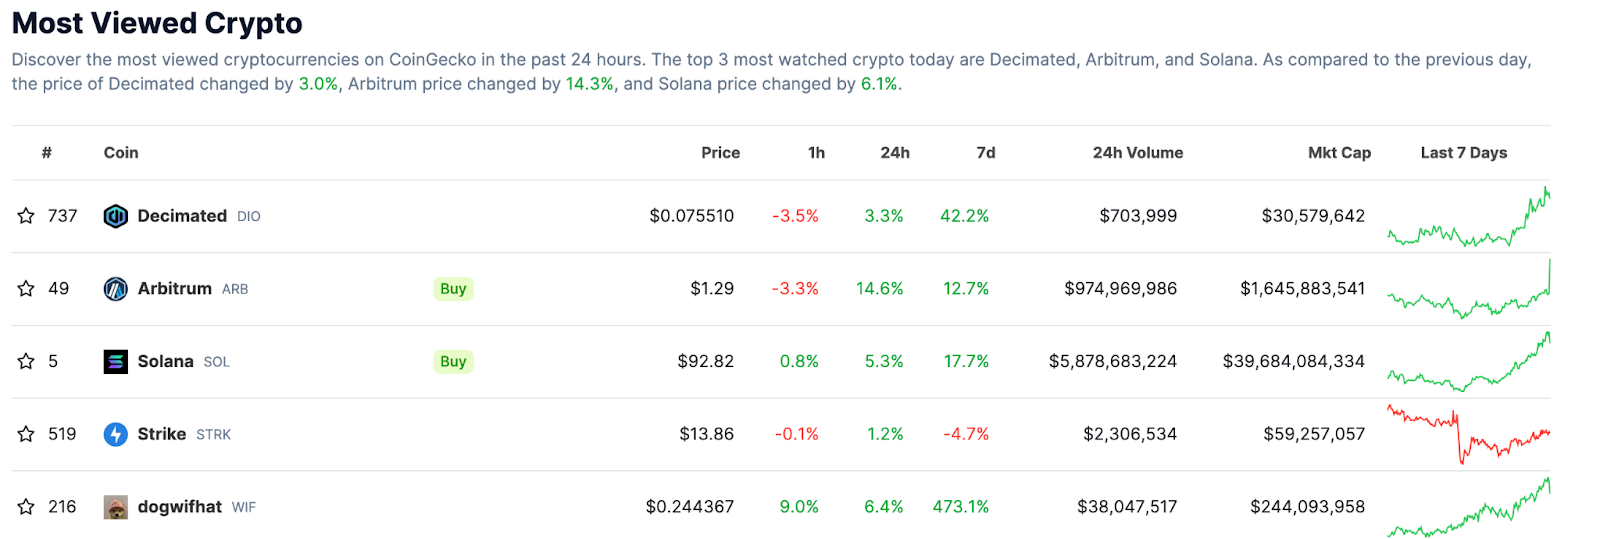 Most Viewed Crypto. Source: CoinGecko